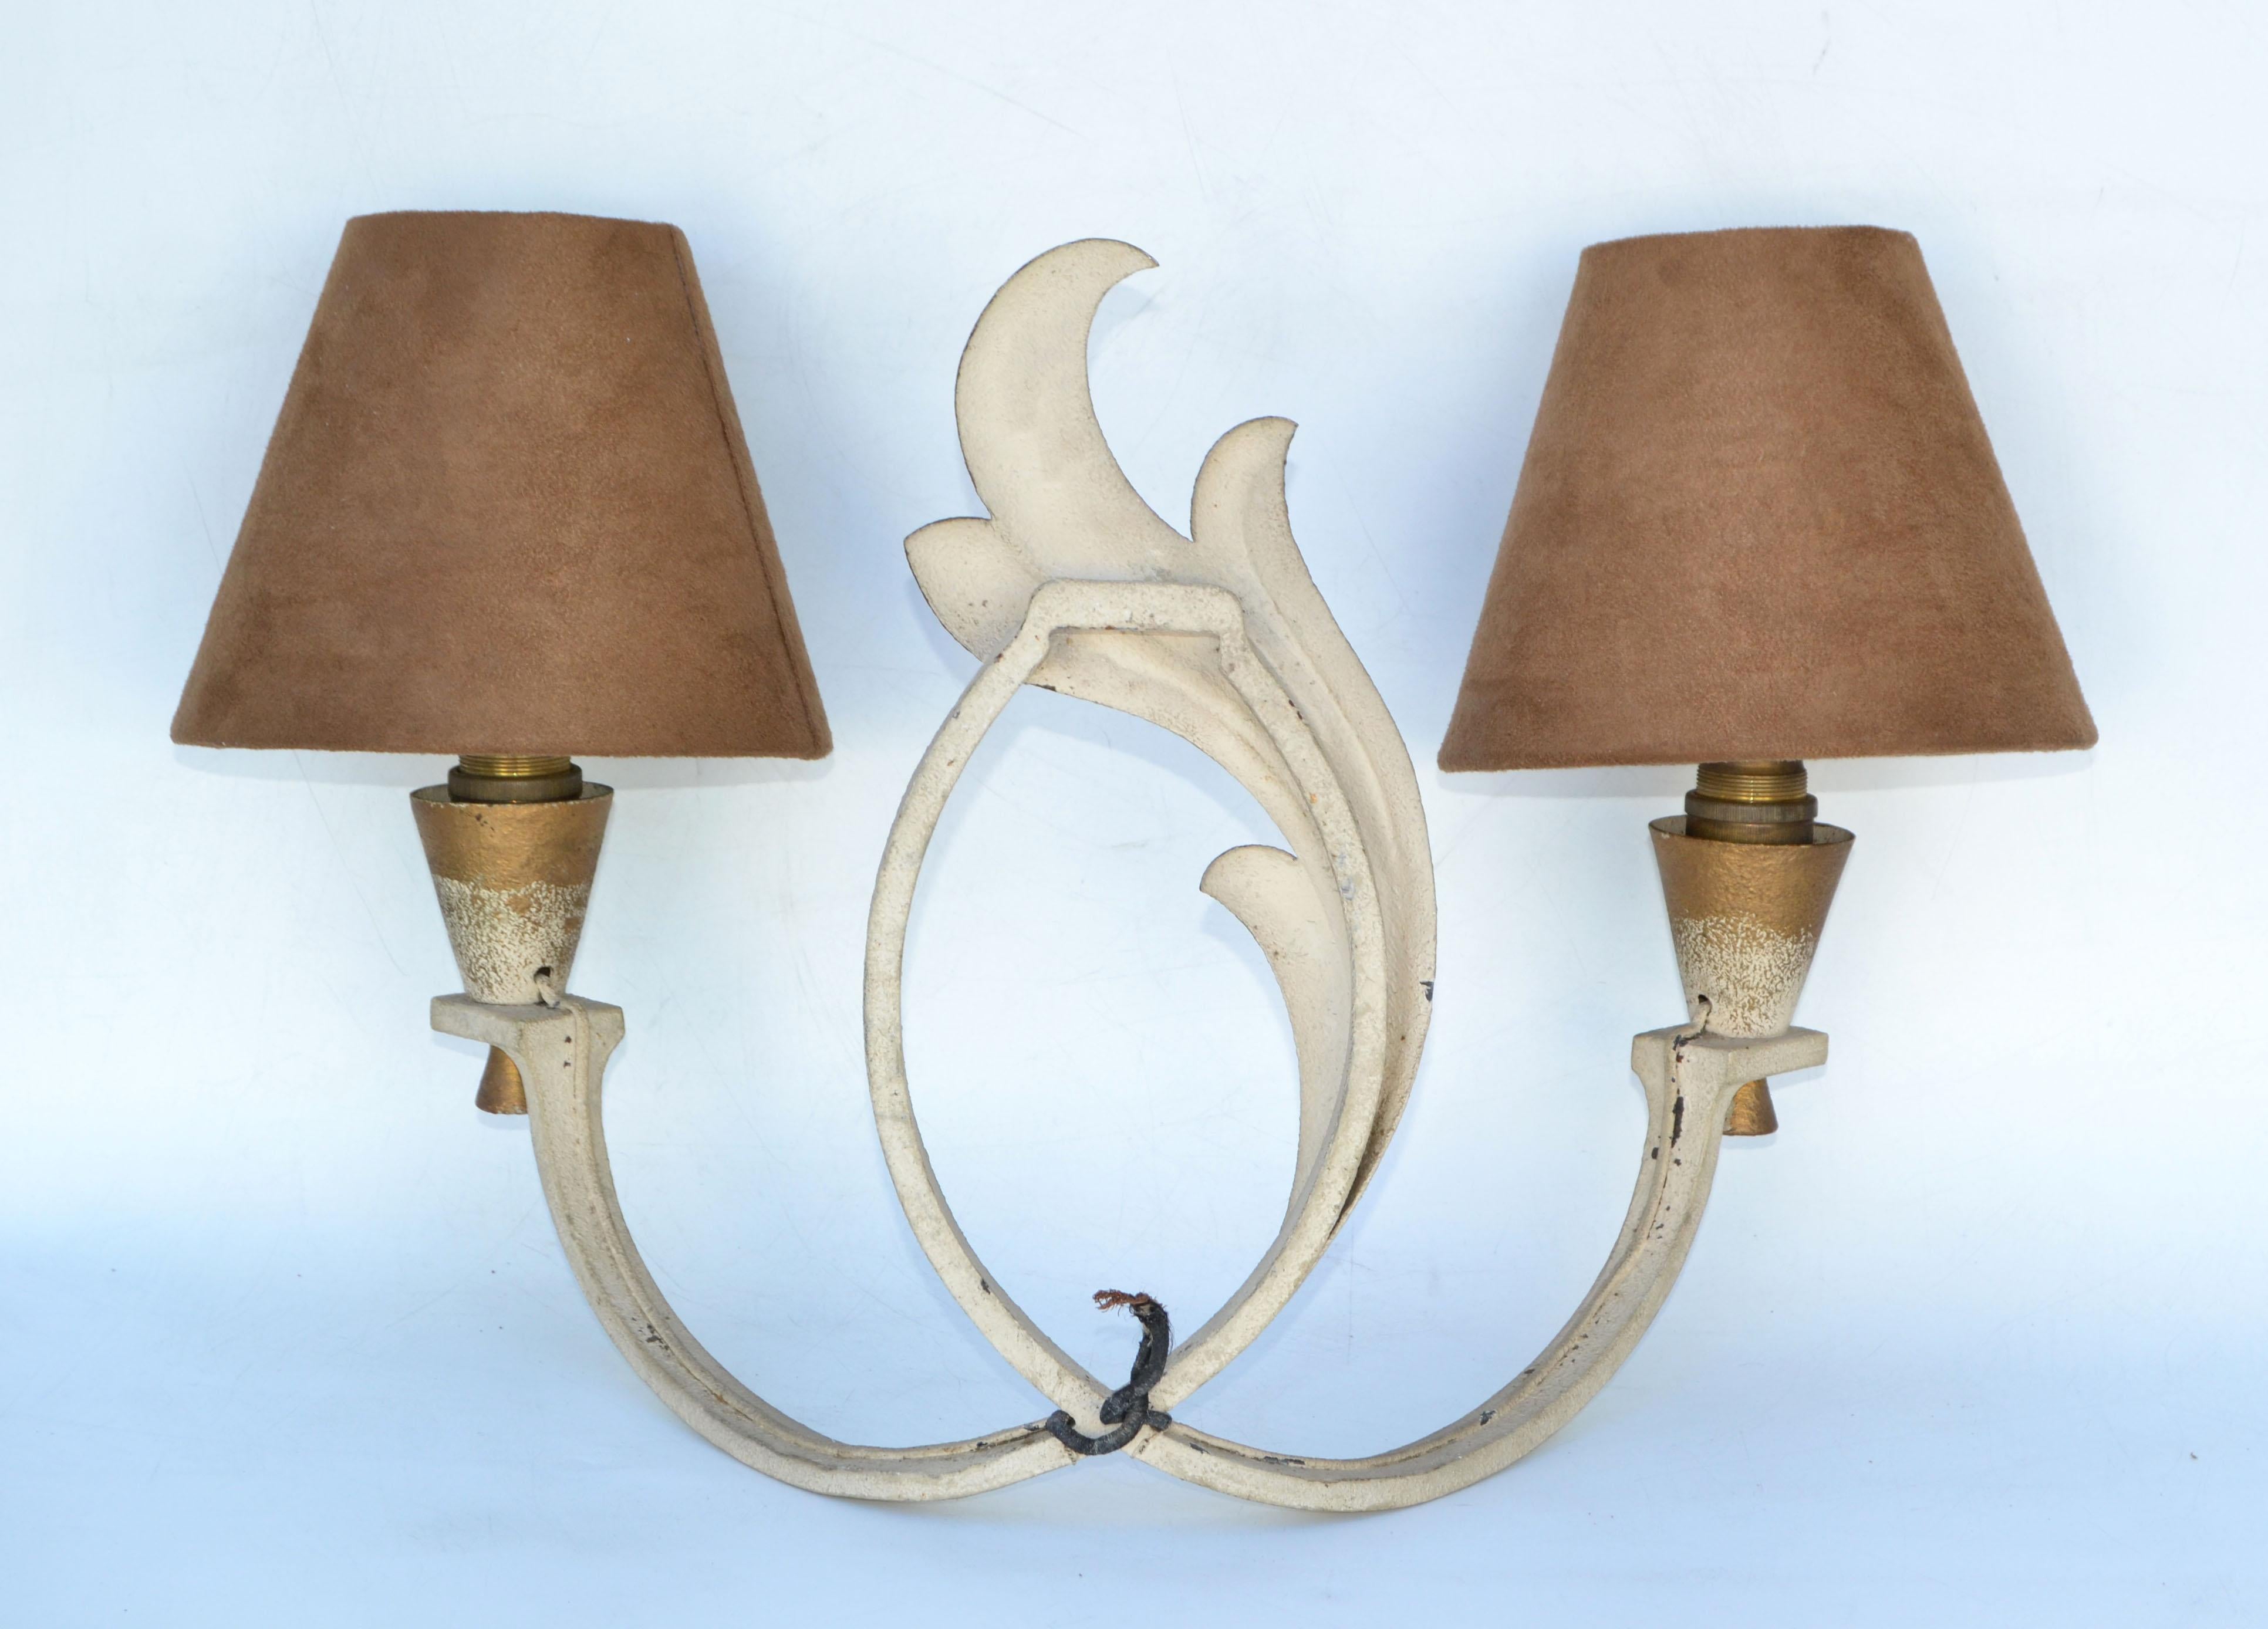 French Wrought Iron Sconces & Shades, Wall Lights Art Deco 1950 For Sale 5